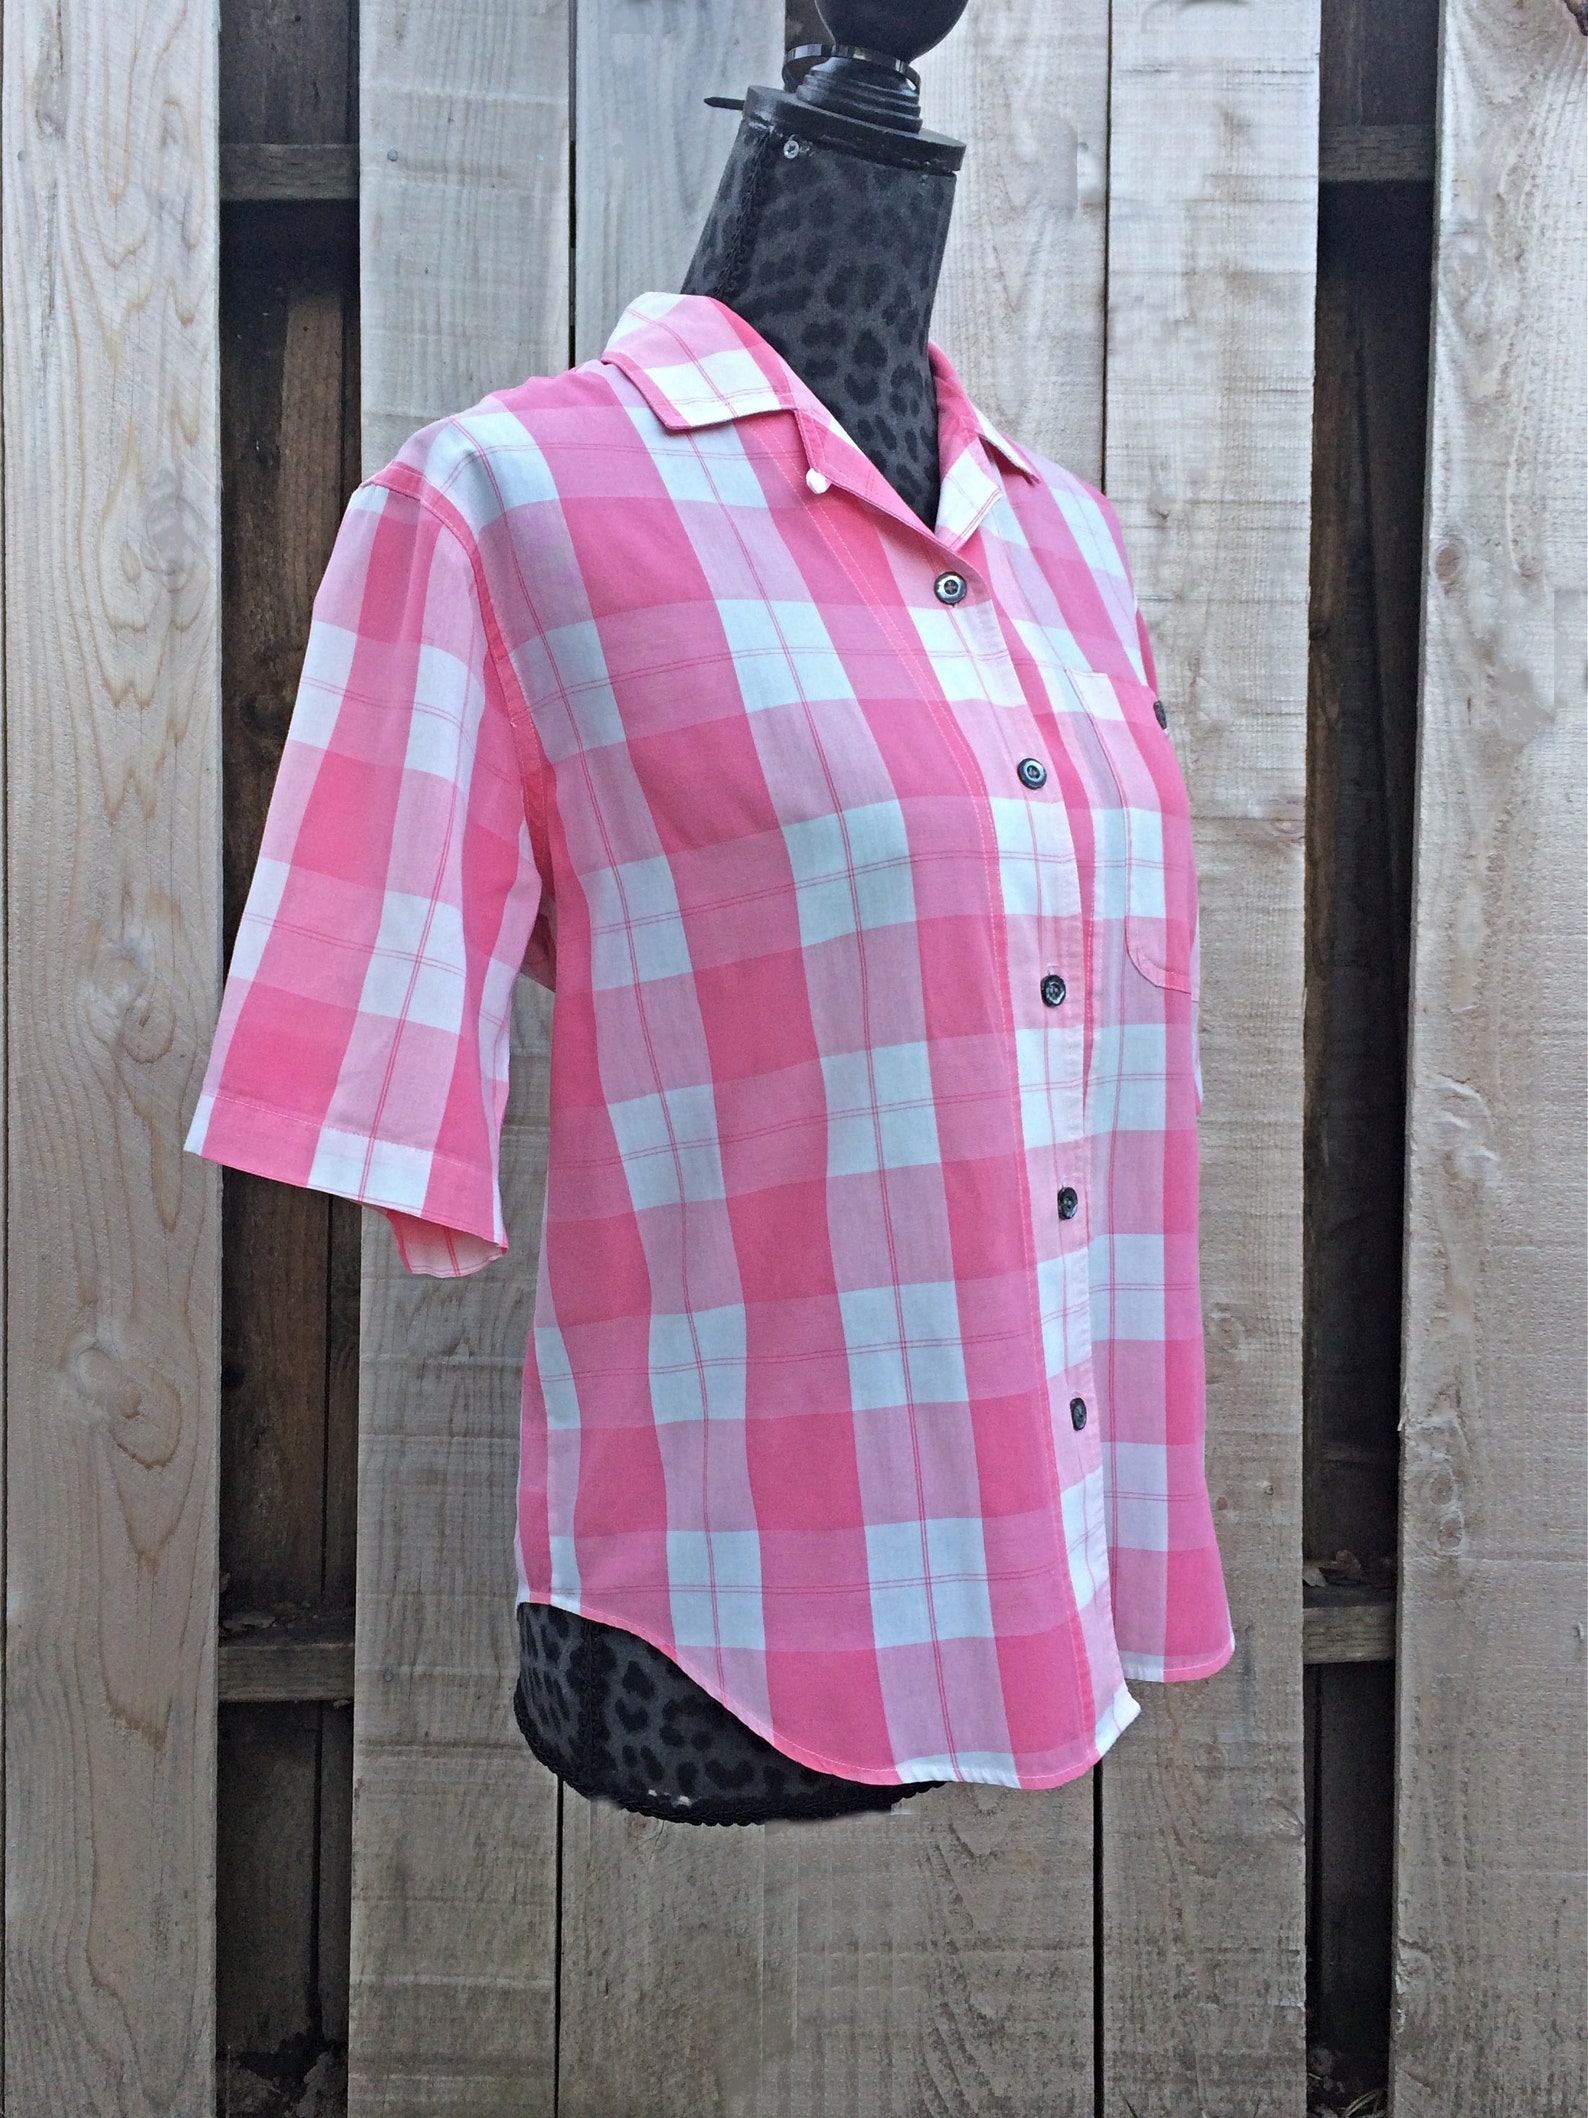 Vintage Pink and White Plaid Blouse / Pink Plaid Blouse / Pink | Etsy